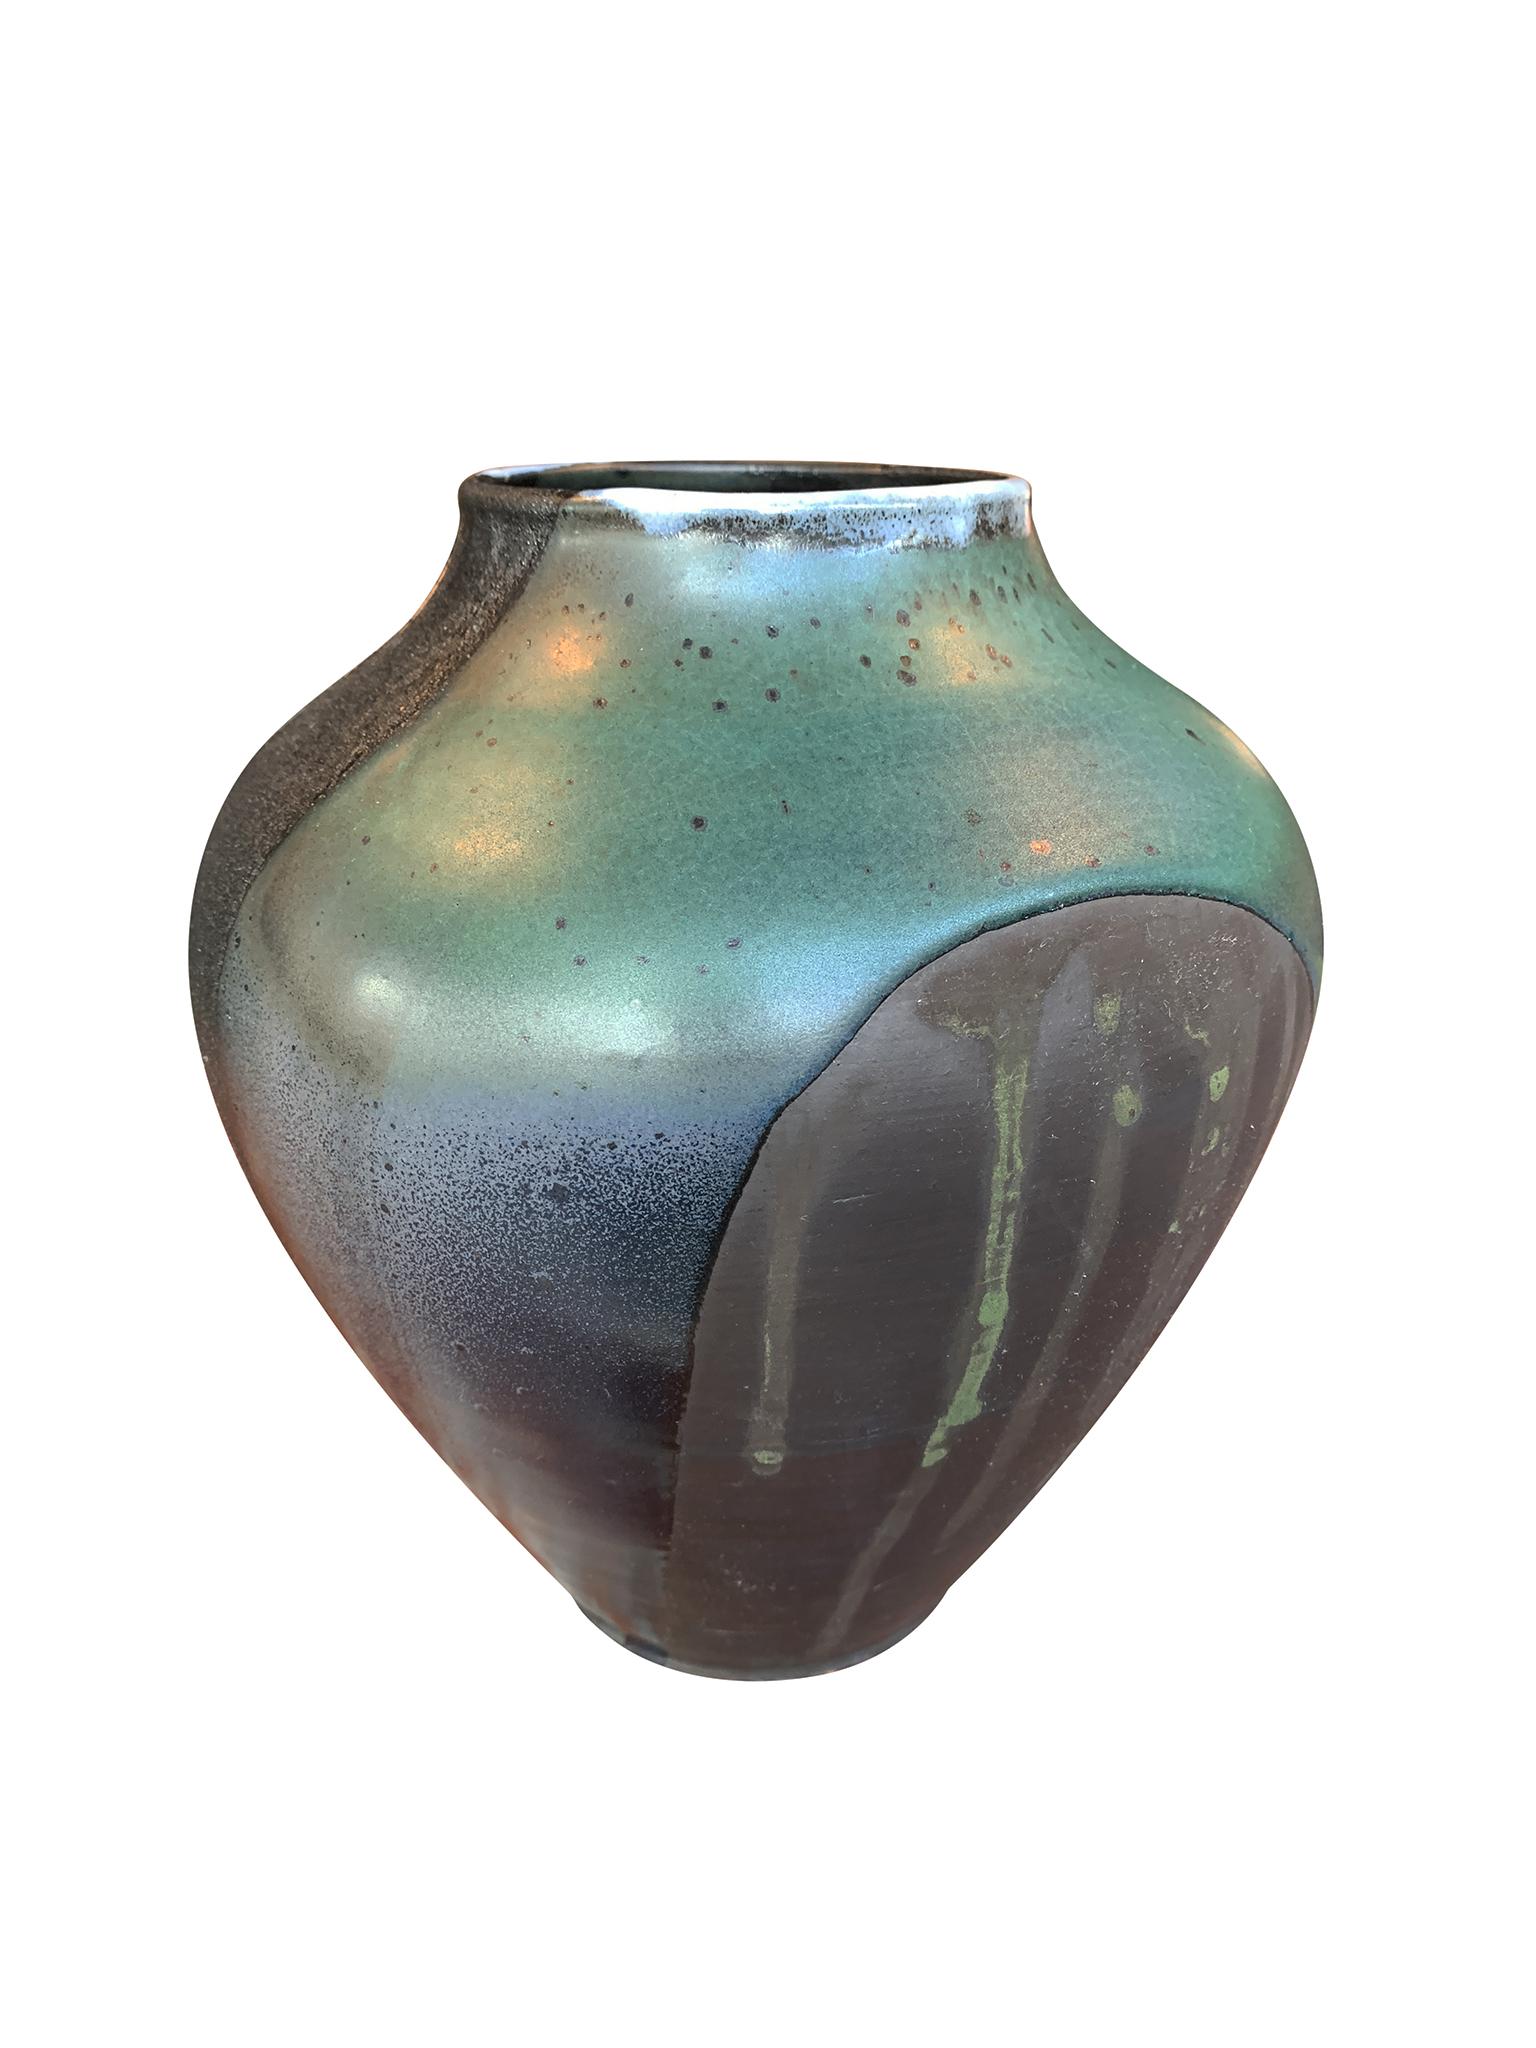 A Thom Lussier ceramic urn exclusively made for Cafiero Select. The vase is one of a series of vessels on which the artist applies a mixture of glazing techniques to create richly textured surfaces. Here, he combines metallic glazing with a matte